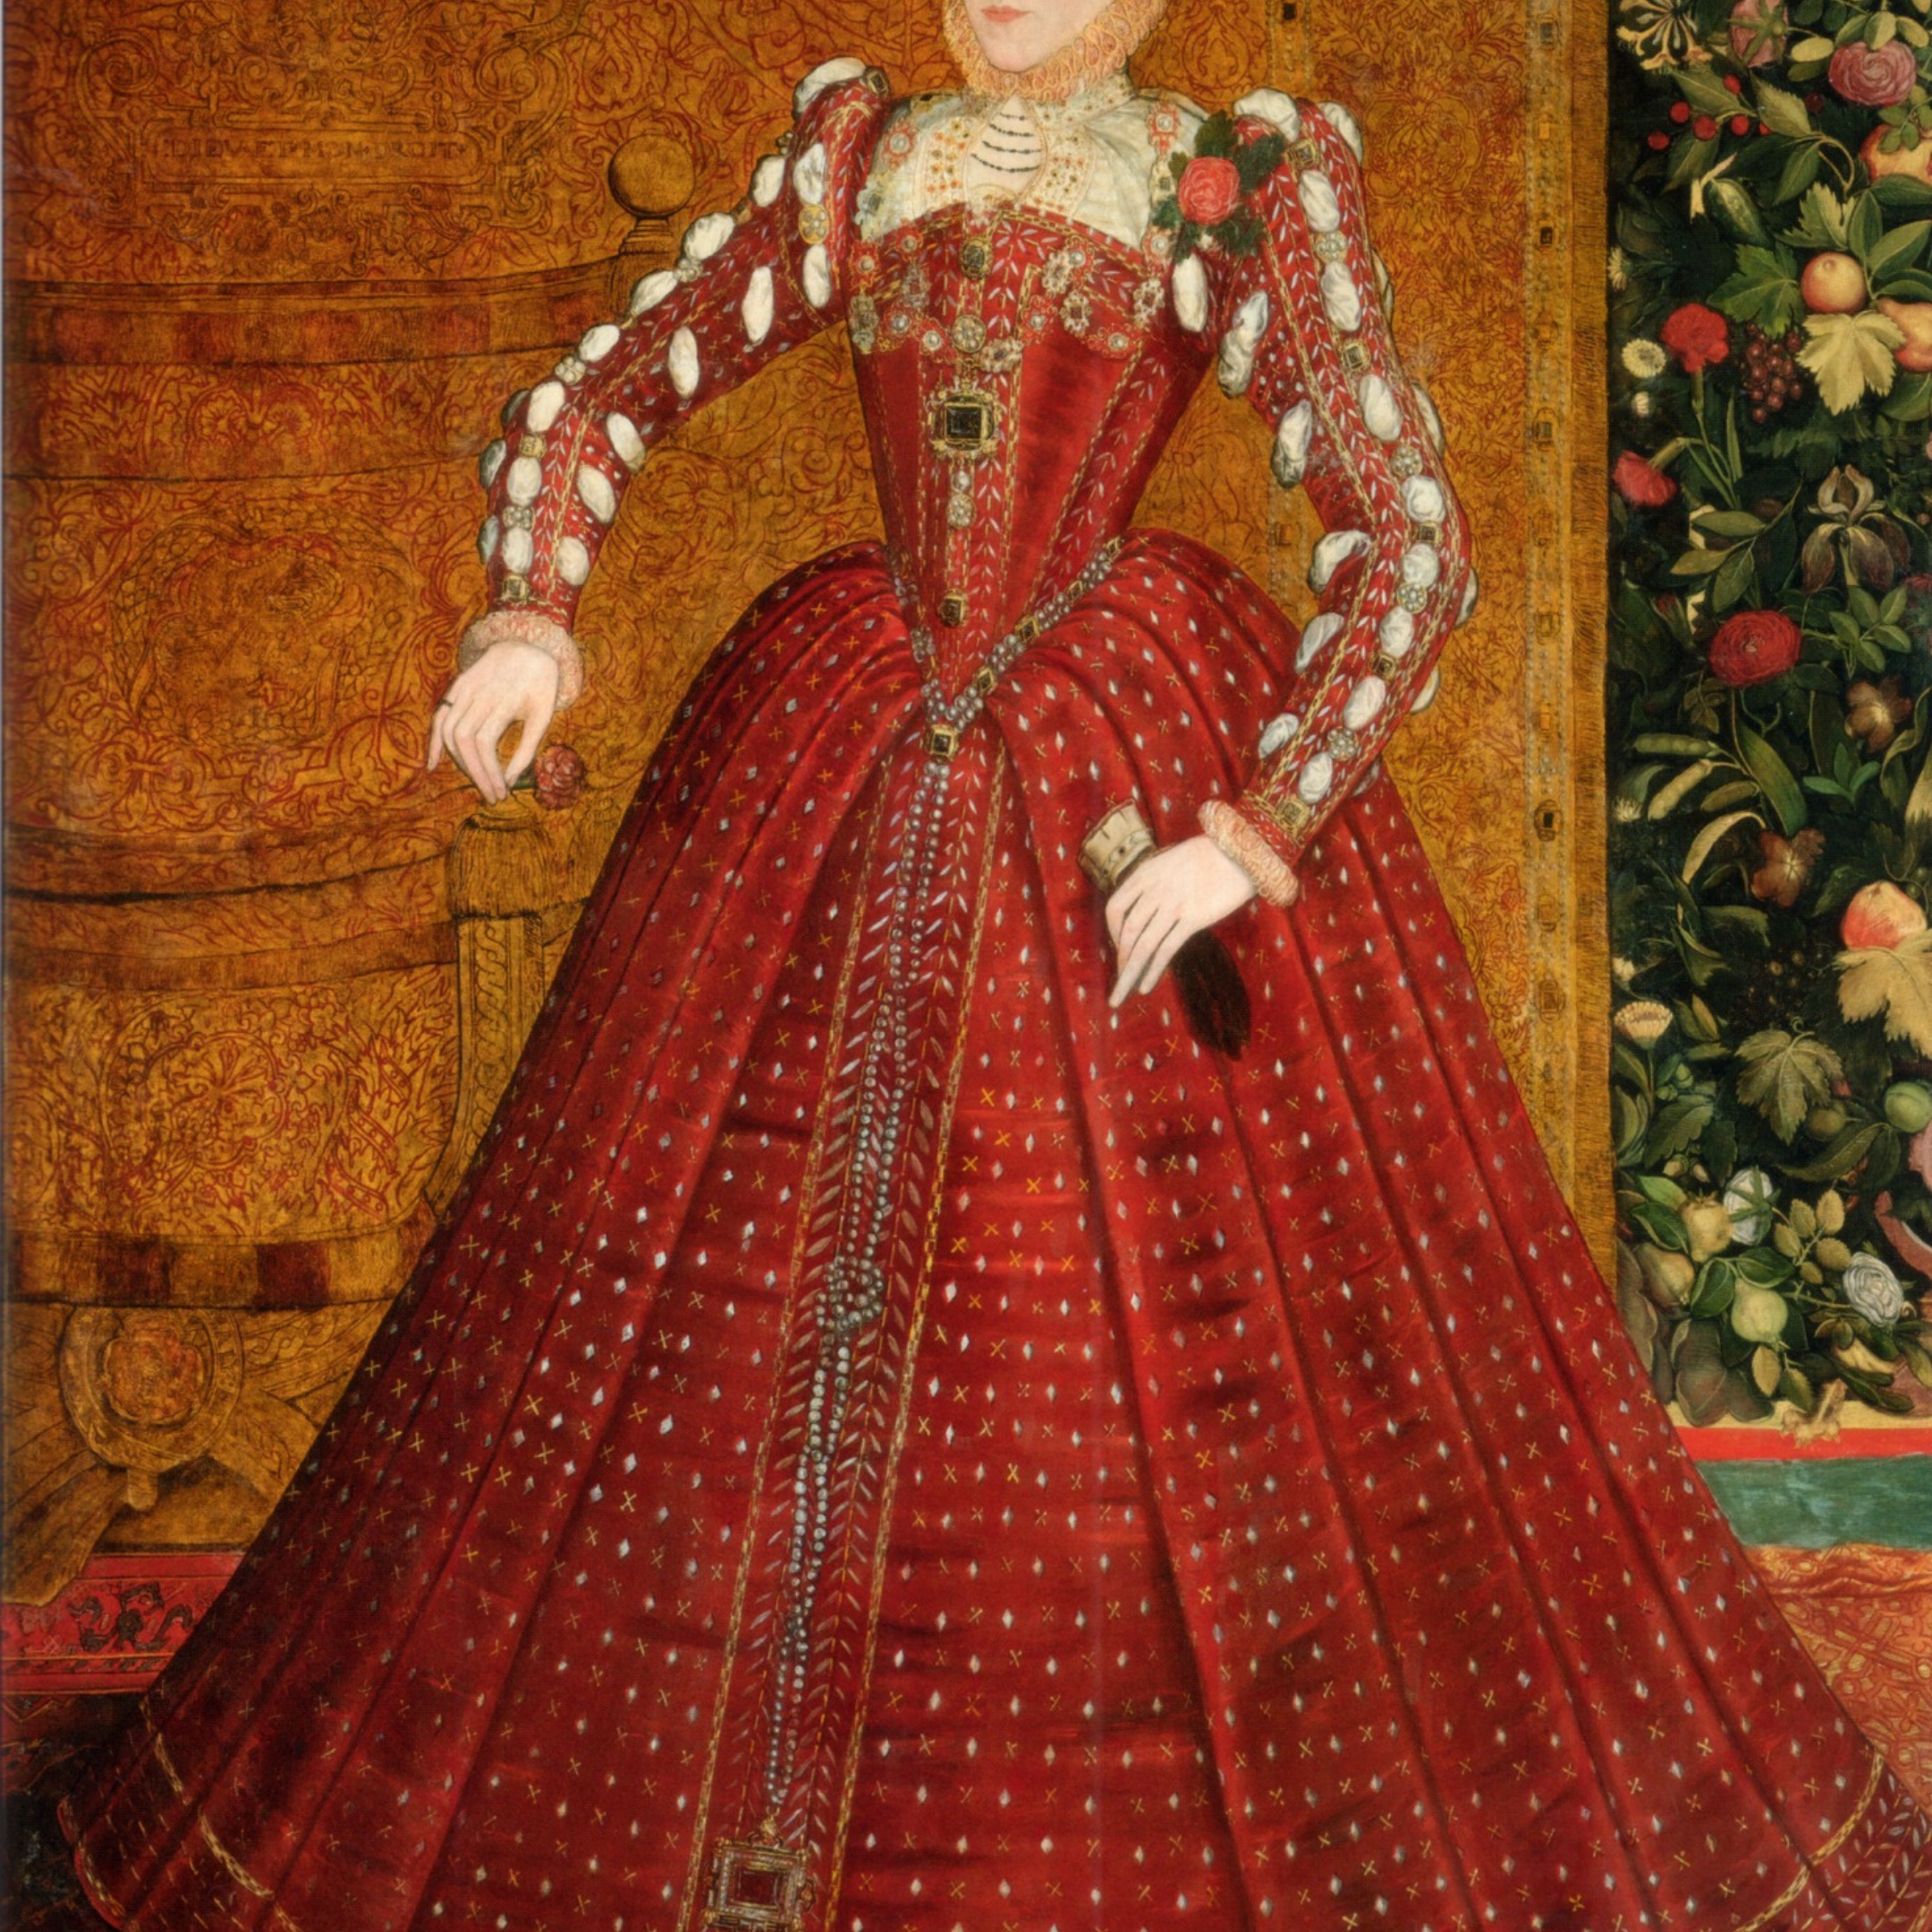 a portrait from Elizabeth I's age